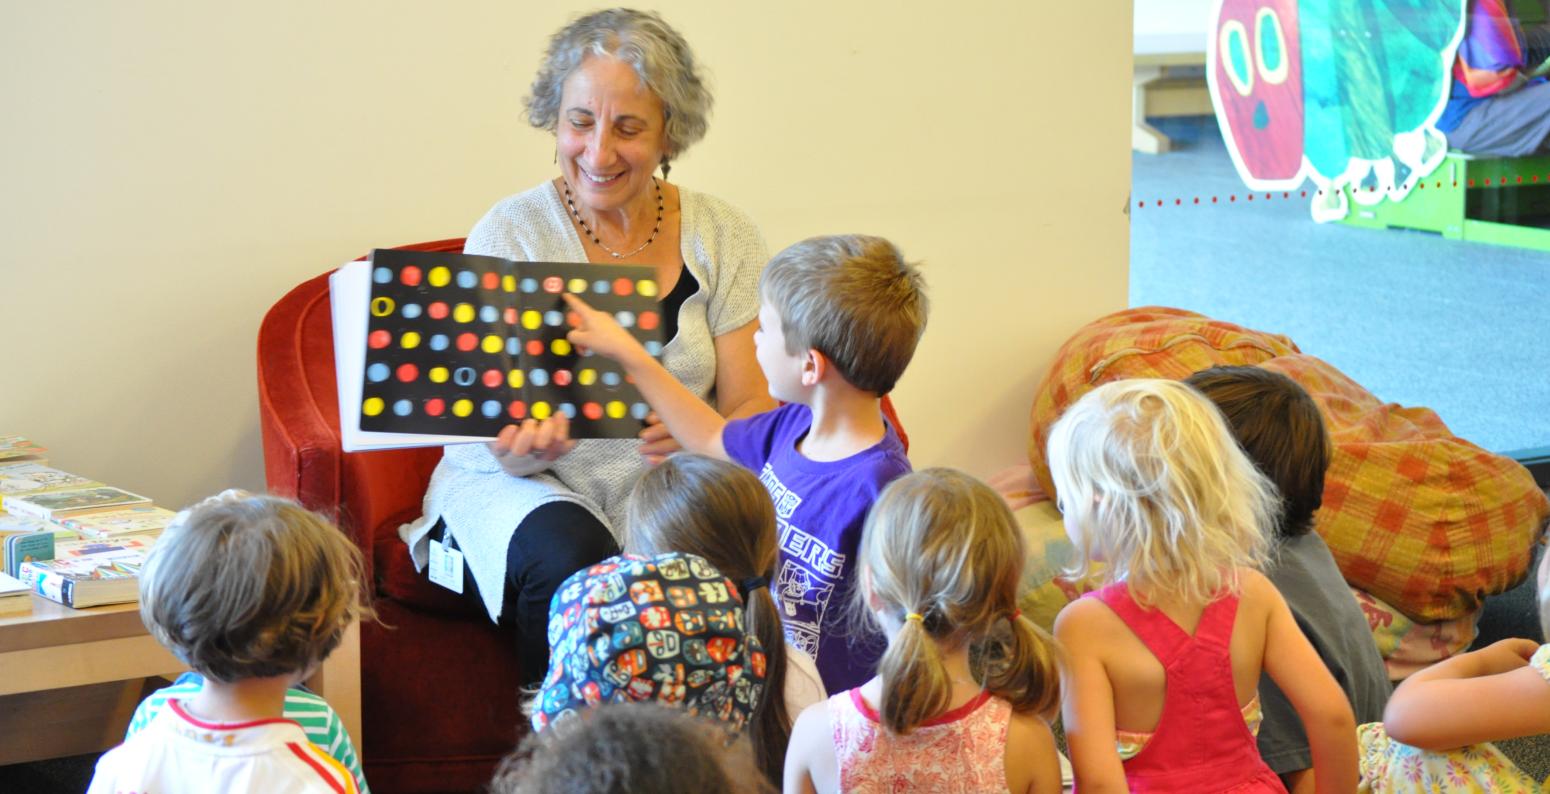 Group of children looking and pointing at book held by adult.